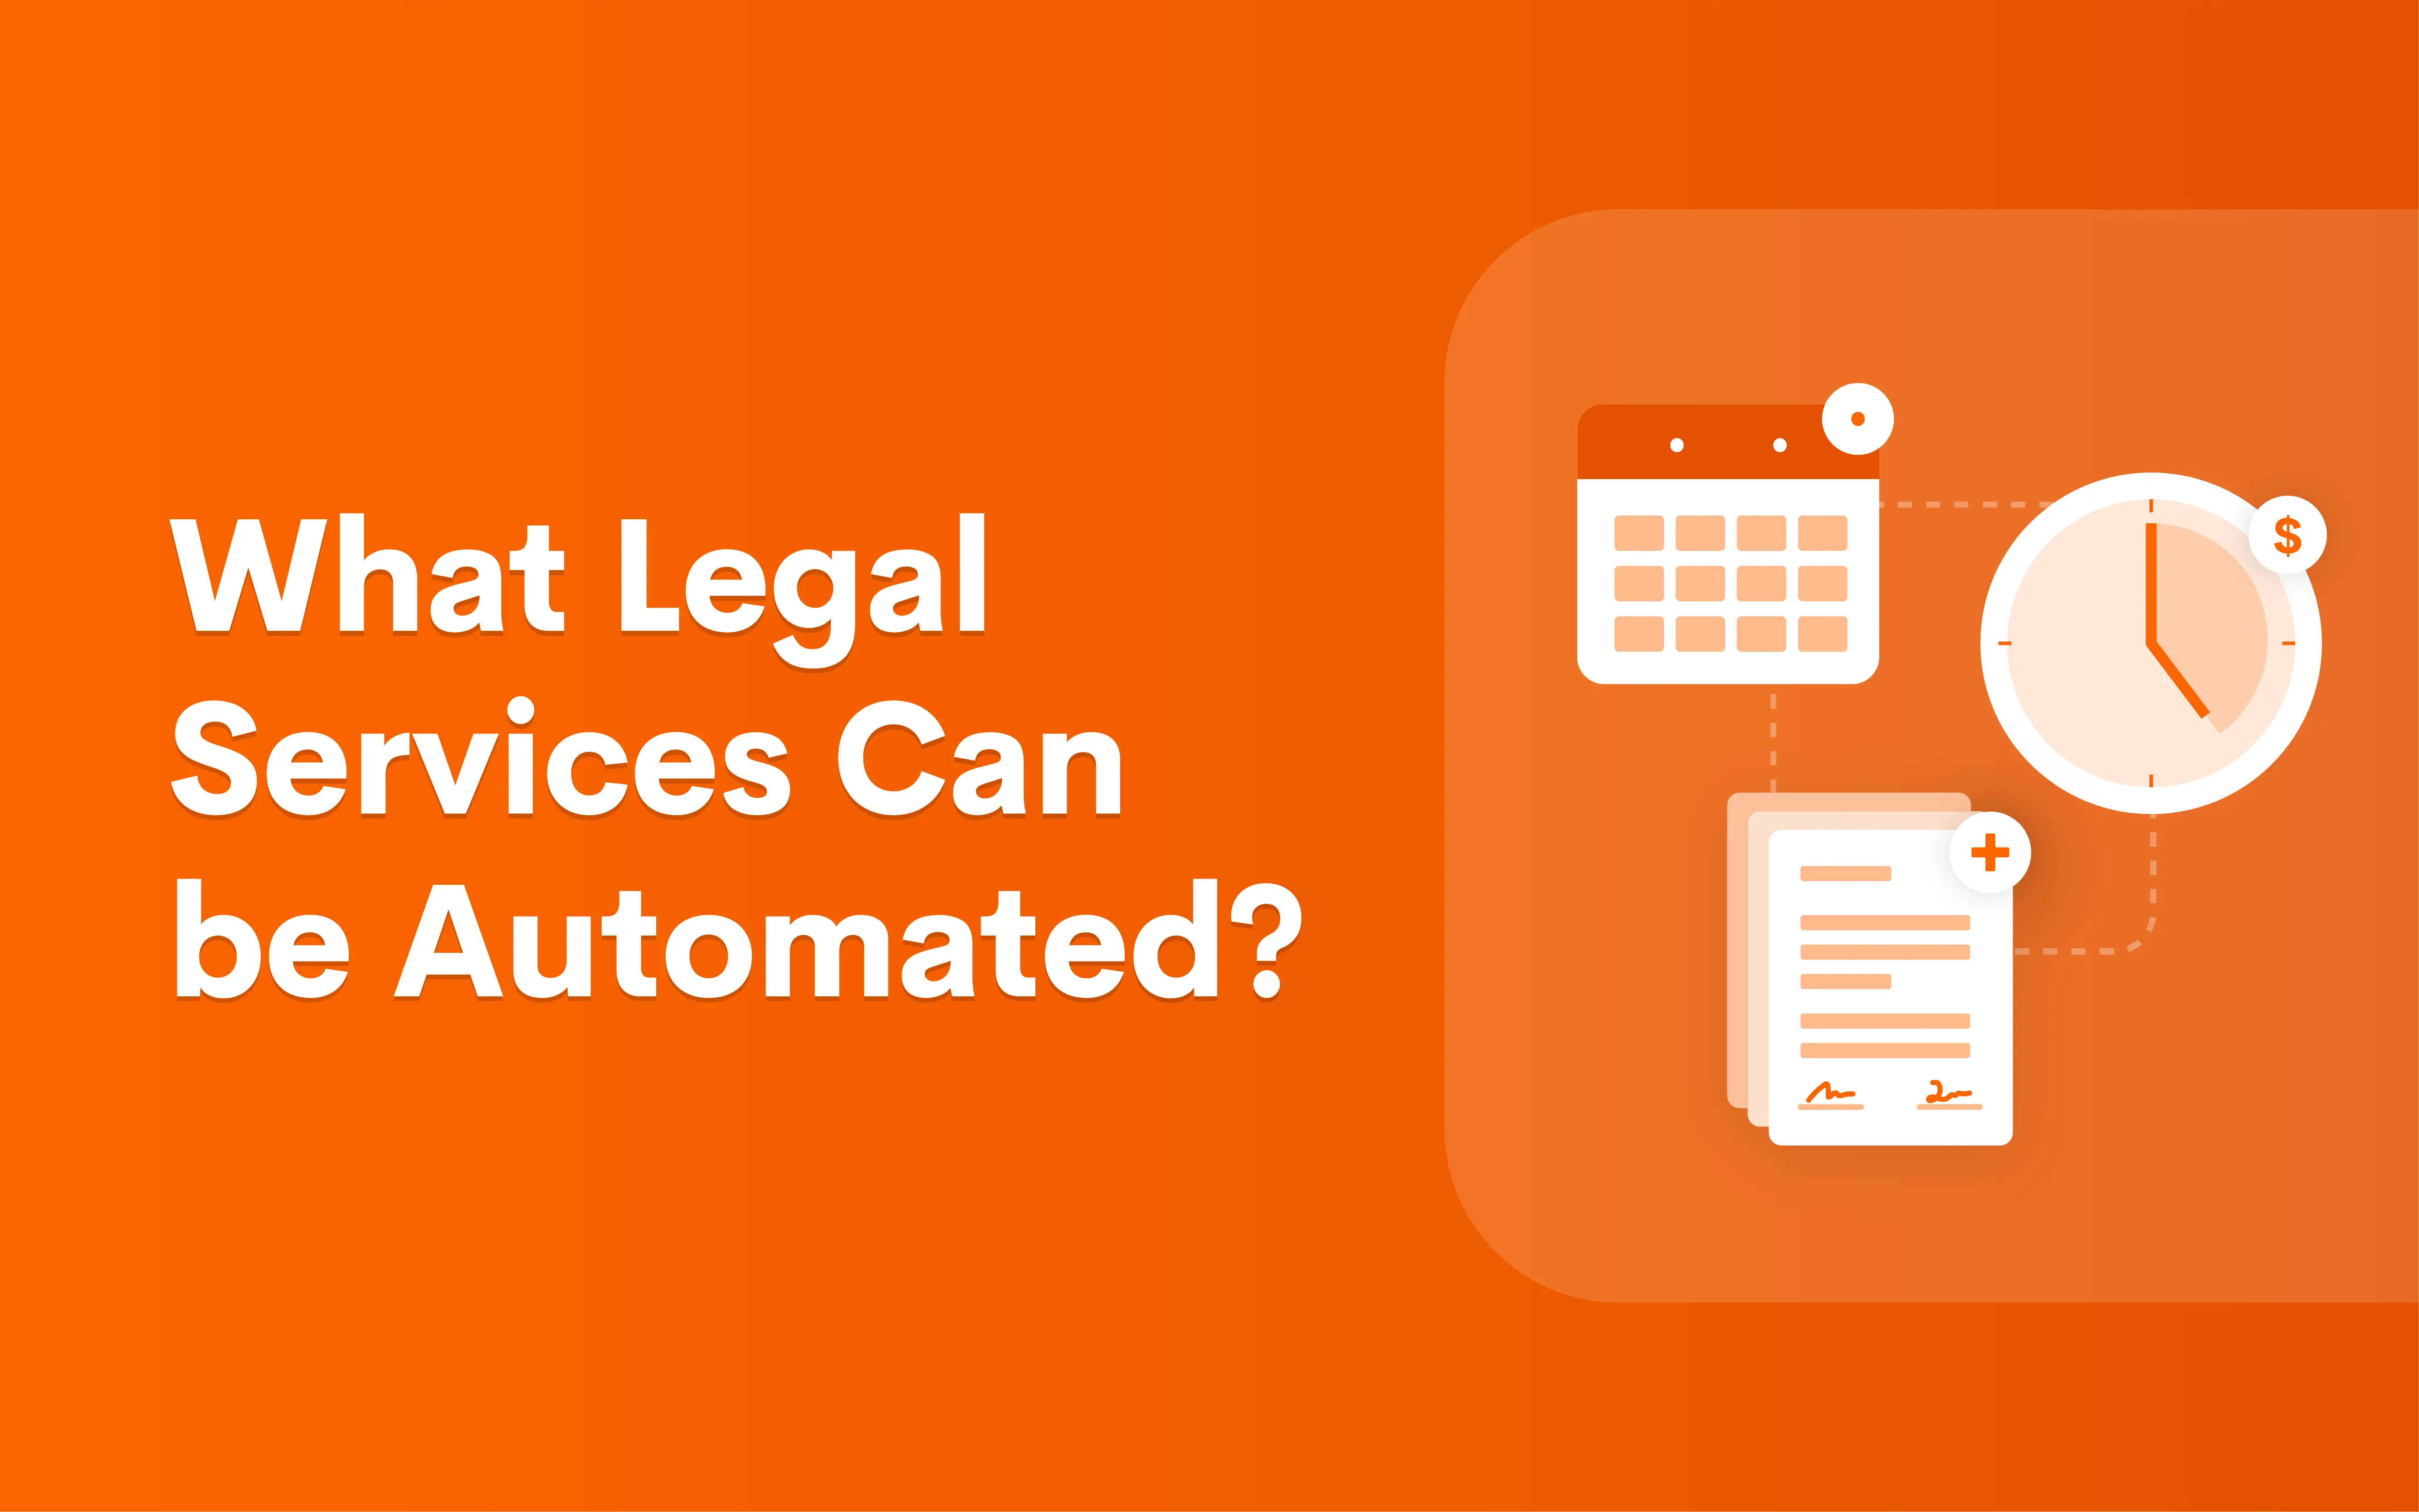 What Legal Services Can be Automated?